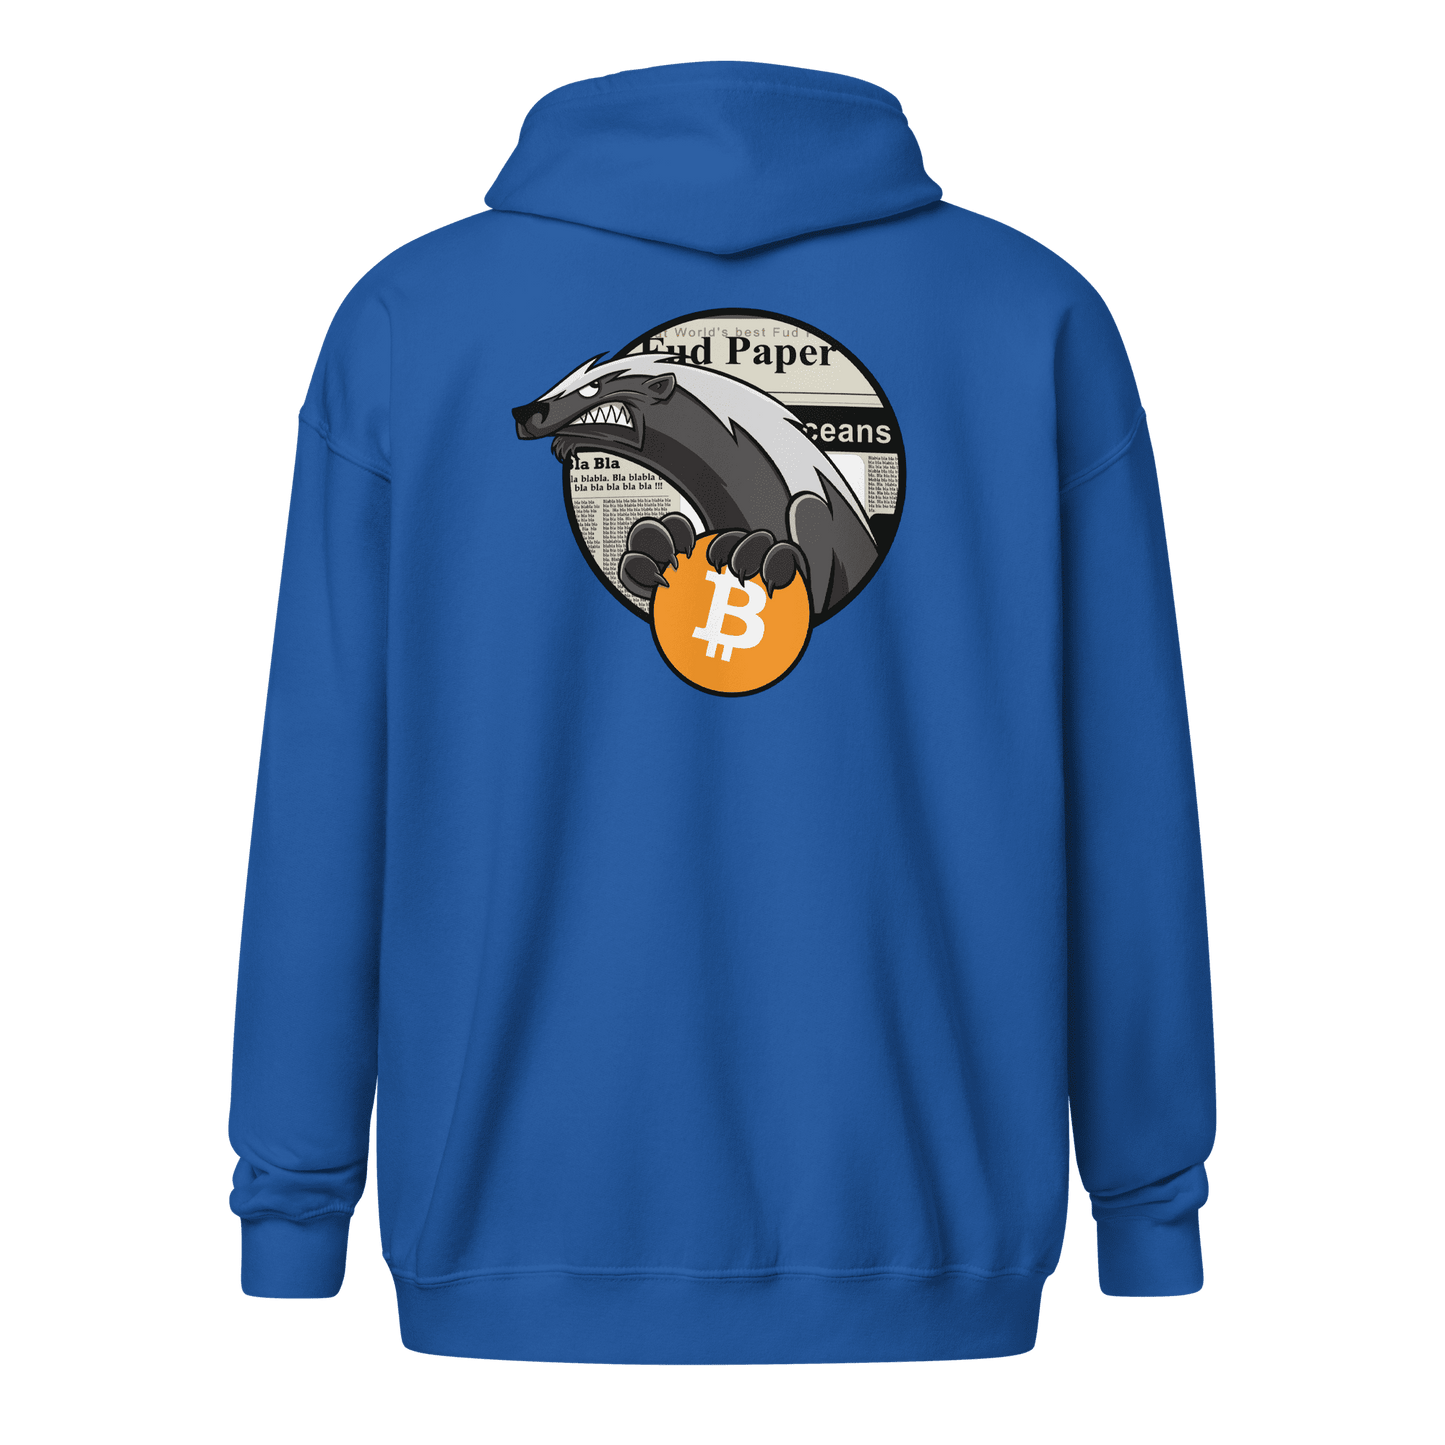 Back view of a royal blue bitcoin zip hoodie.